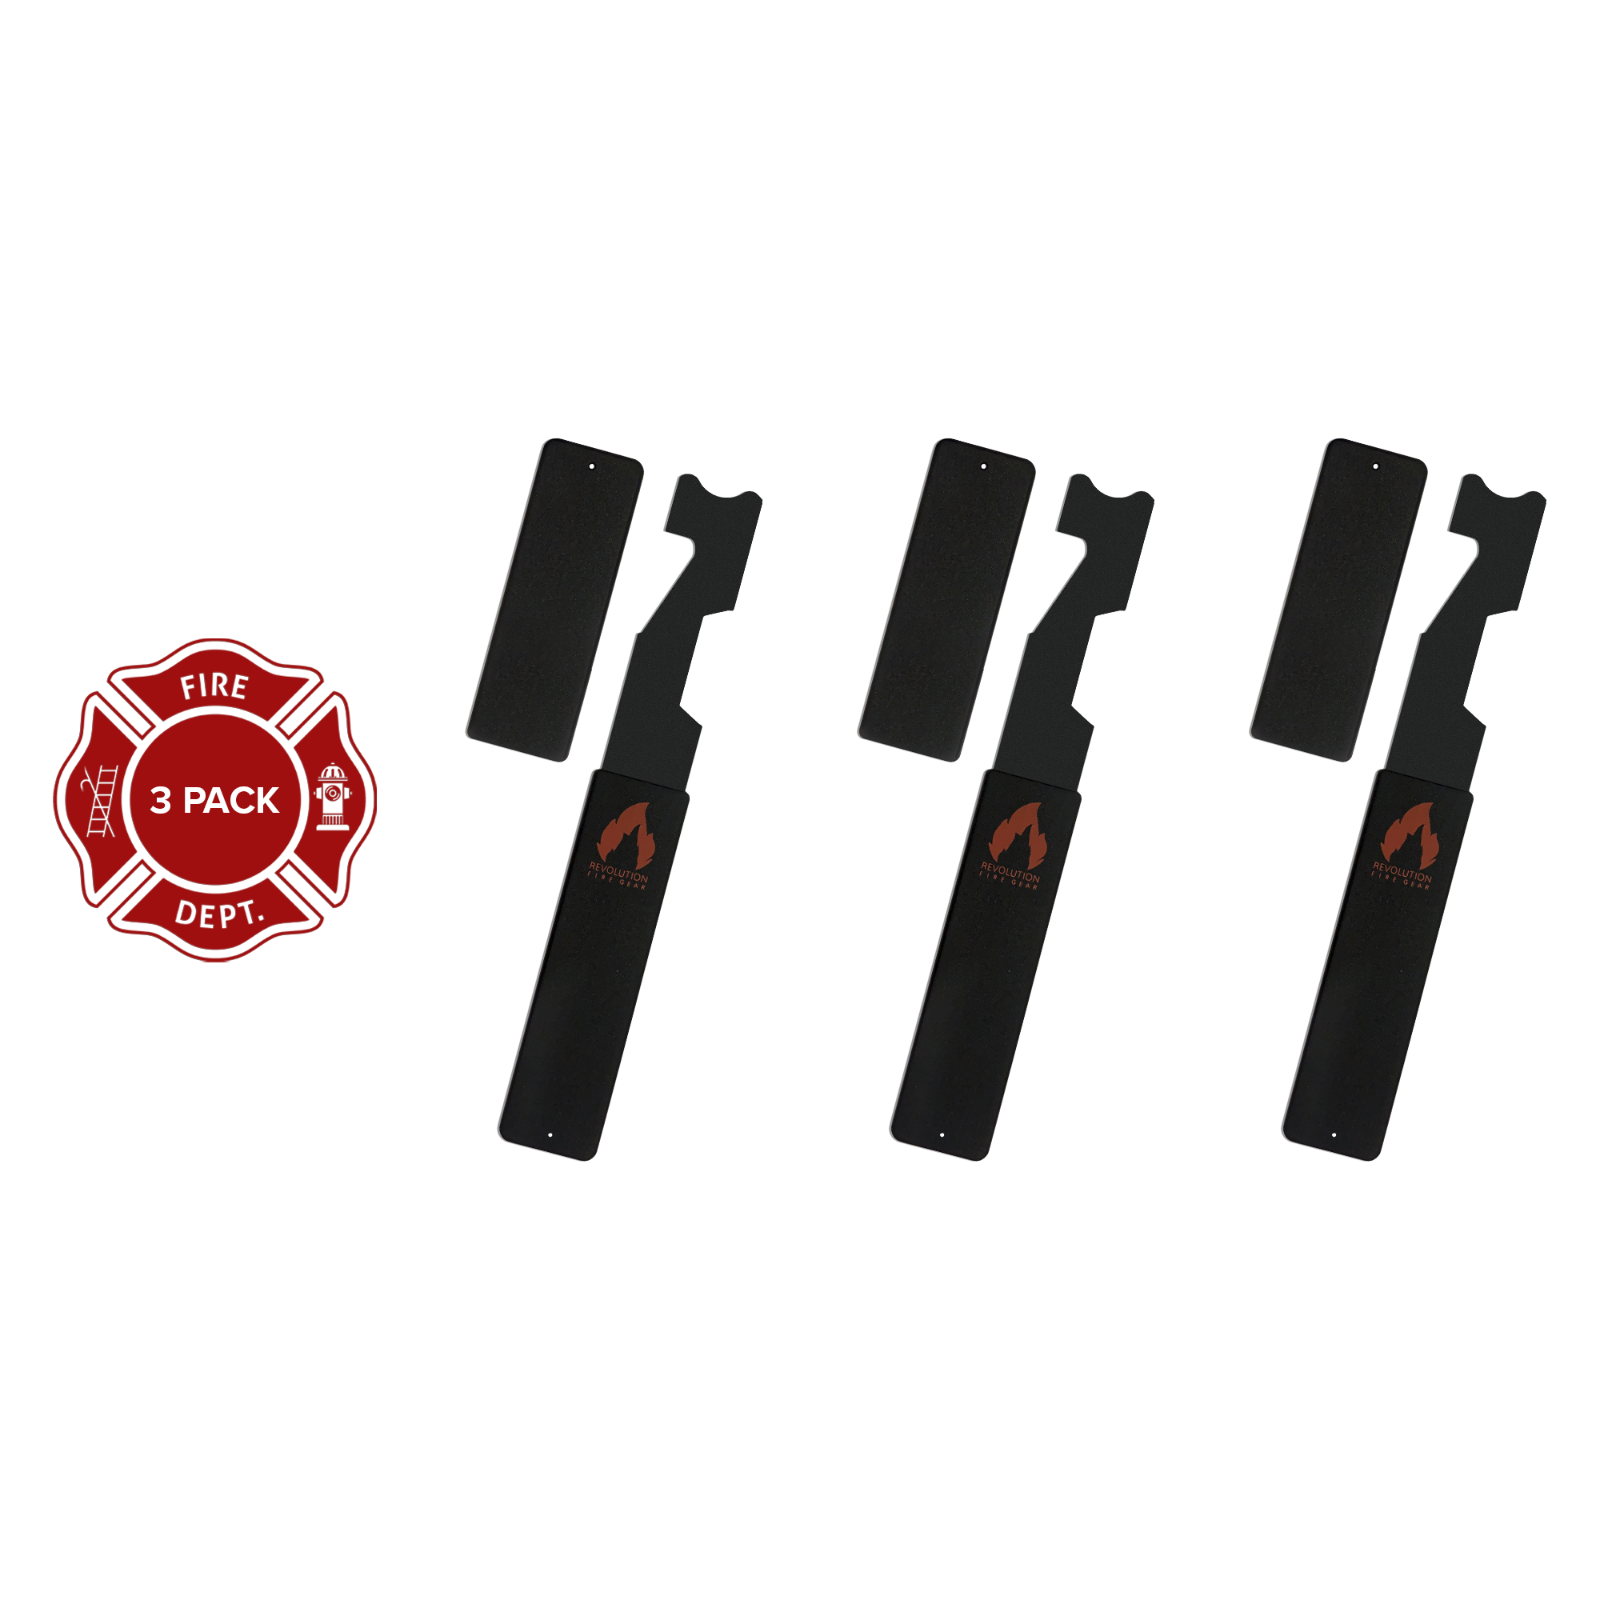 Shove Knife - 3 Pack - Pry Tool Police, Emt, Firefighter Forcible Entry Tool